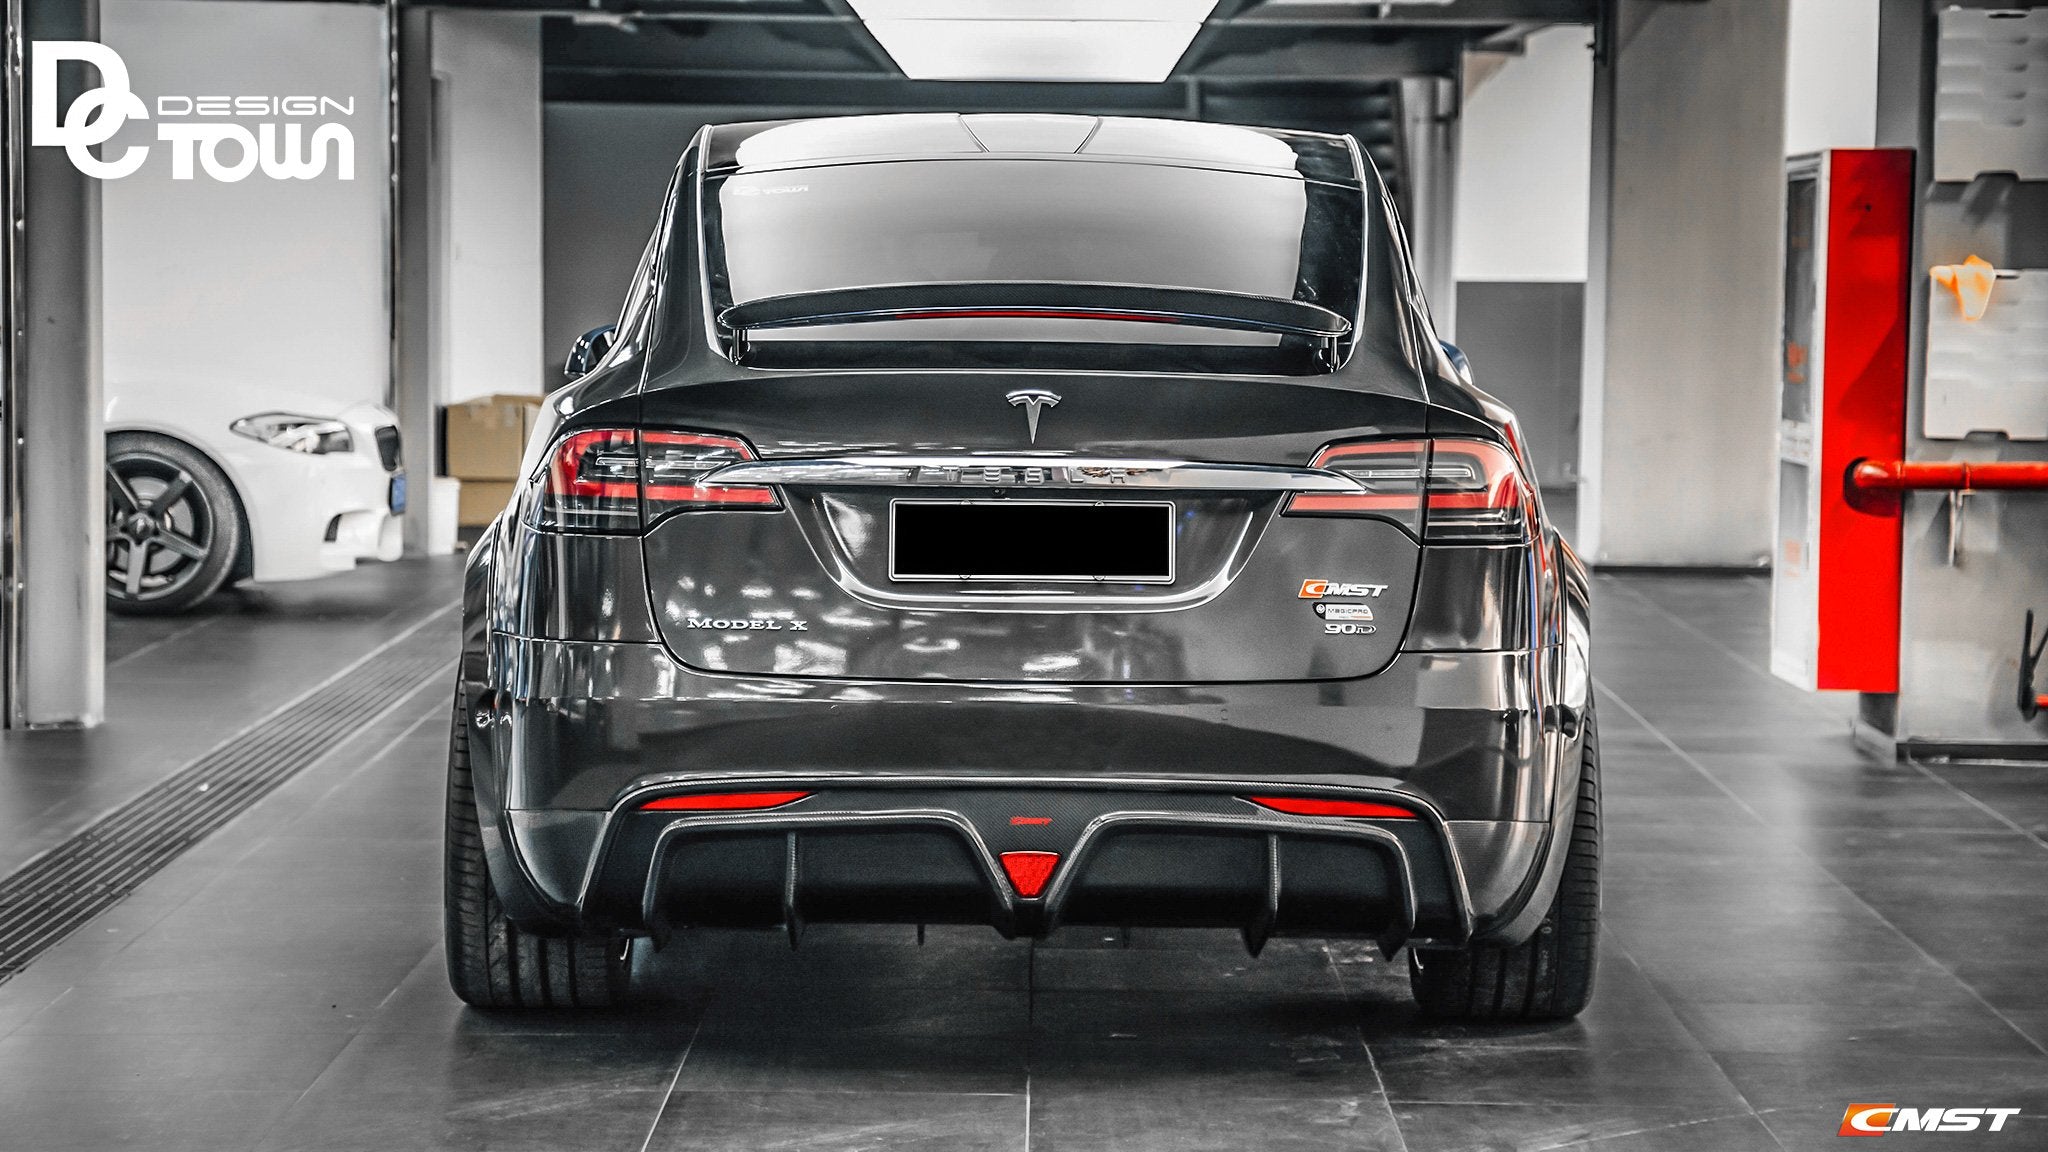 Check our price and buy CMST Carbon Fiber Body Kit set for Tesla Model X!